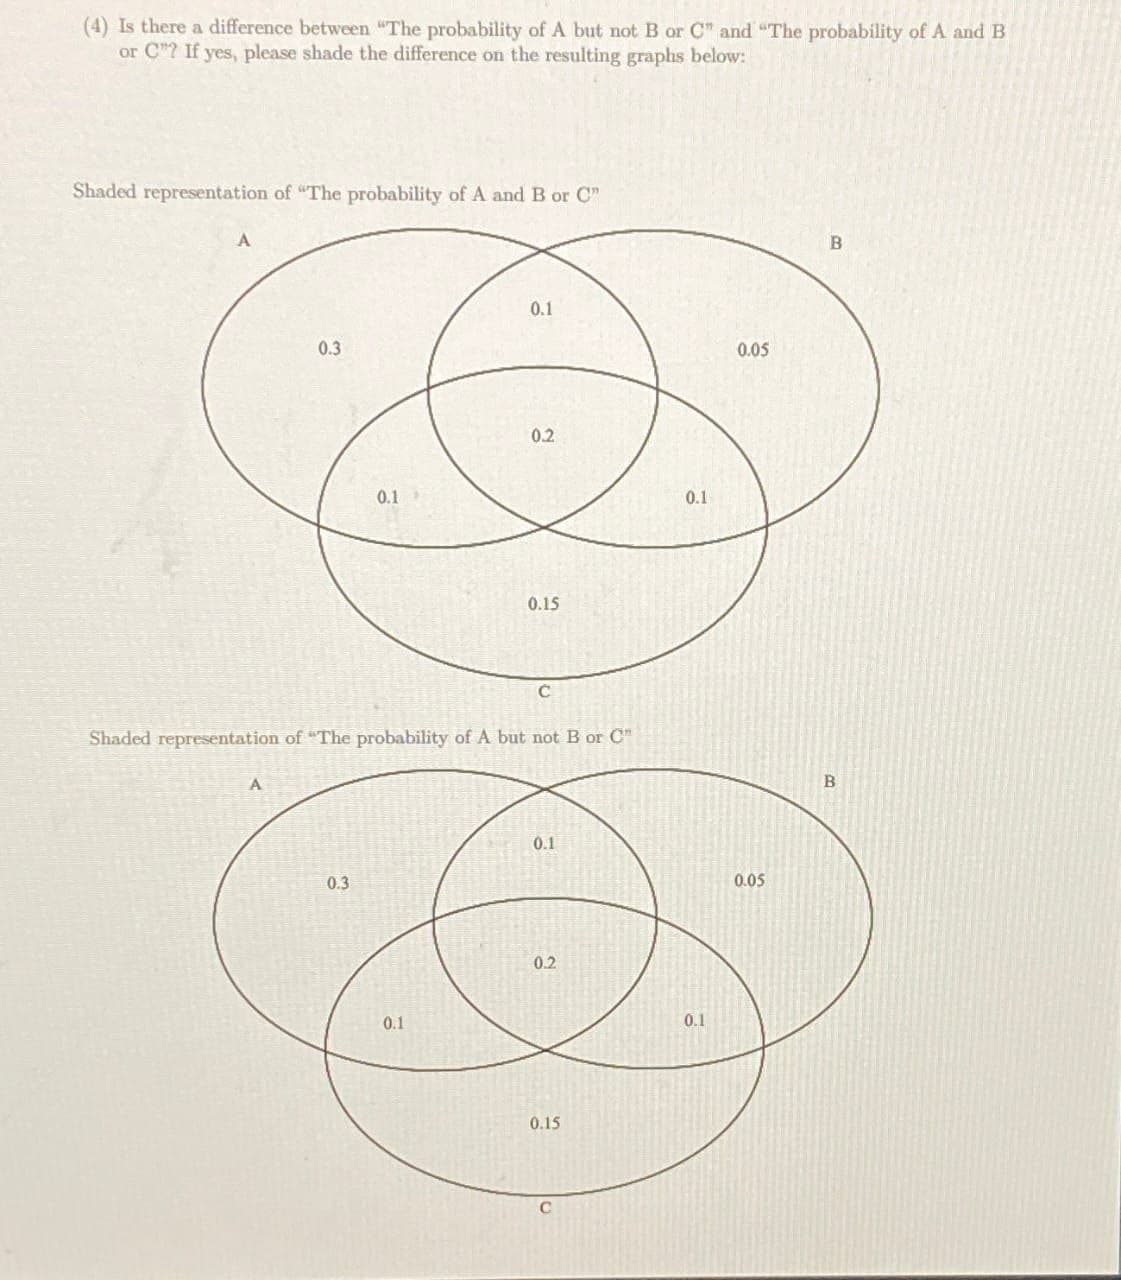 (4) Is there a difference between "The probability of A but not B or C" and "The probability of A and B
or C"? If yes, please shade the difference on the resulting graphs below:
Shaded representation of "The probability of A and B or C"
0.3
0.1
10
0.1
220
0.2
0.15
Shaded representation of "The probability of A but not B or C
A
0.1
0.05
0.1
0.3
0.05
0.1
0.2
0.15
C
0.1
B
B